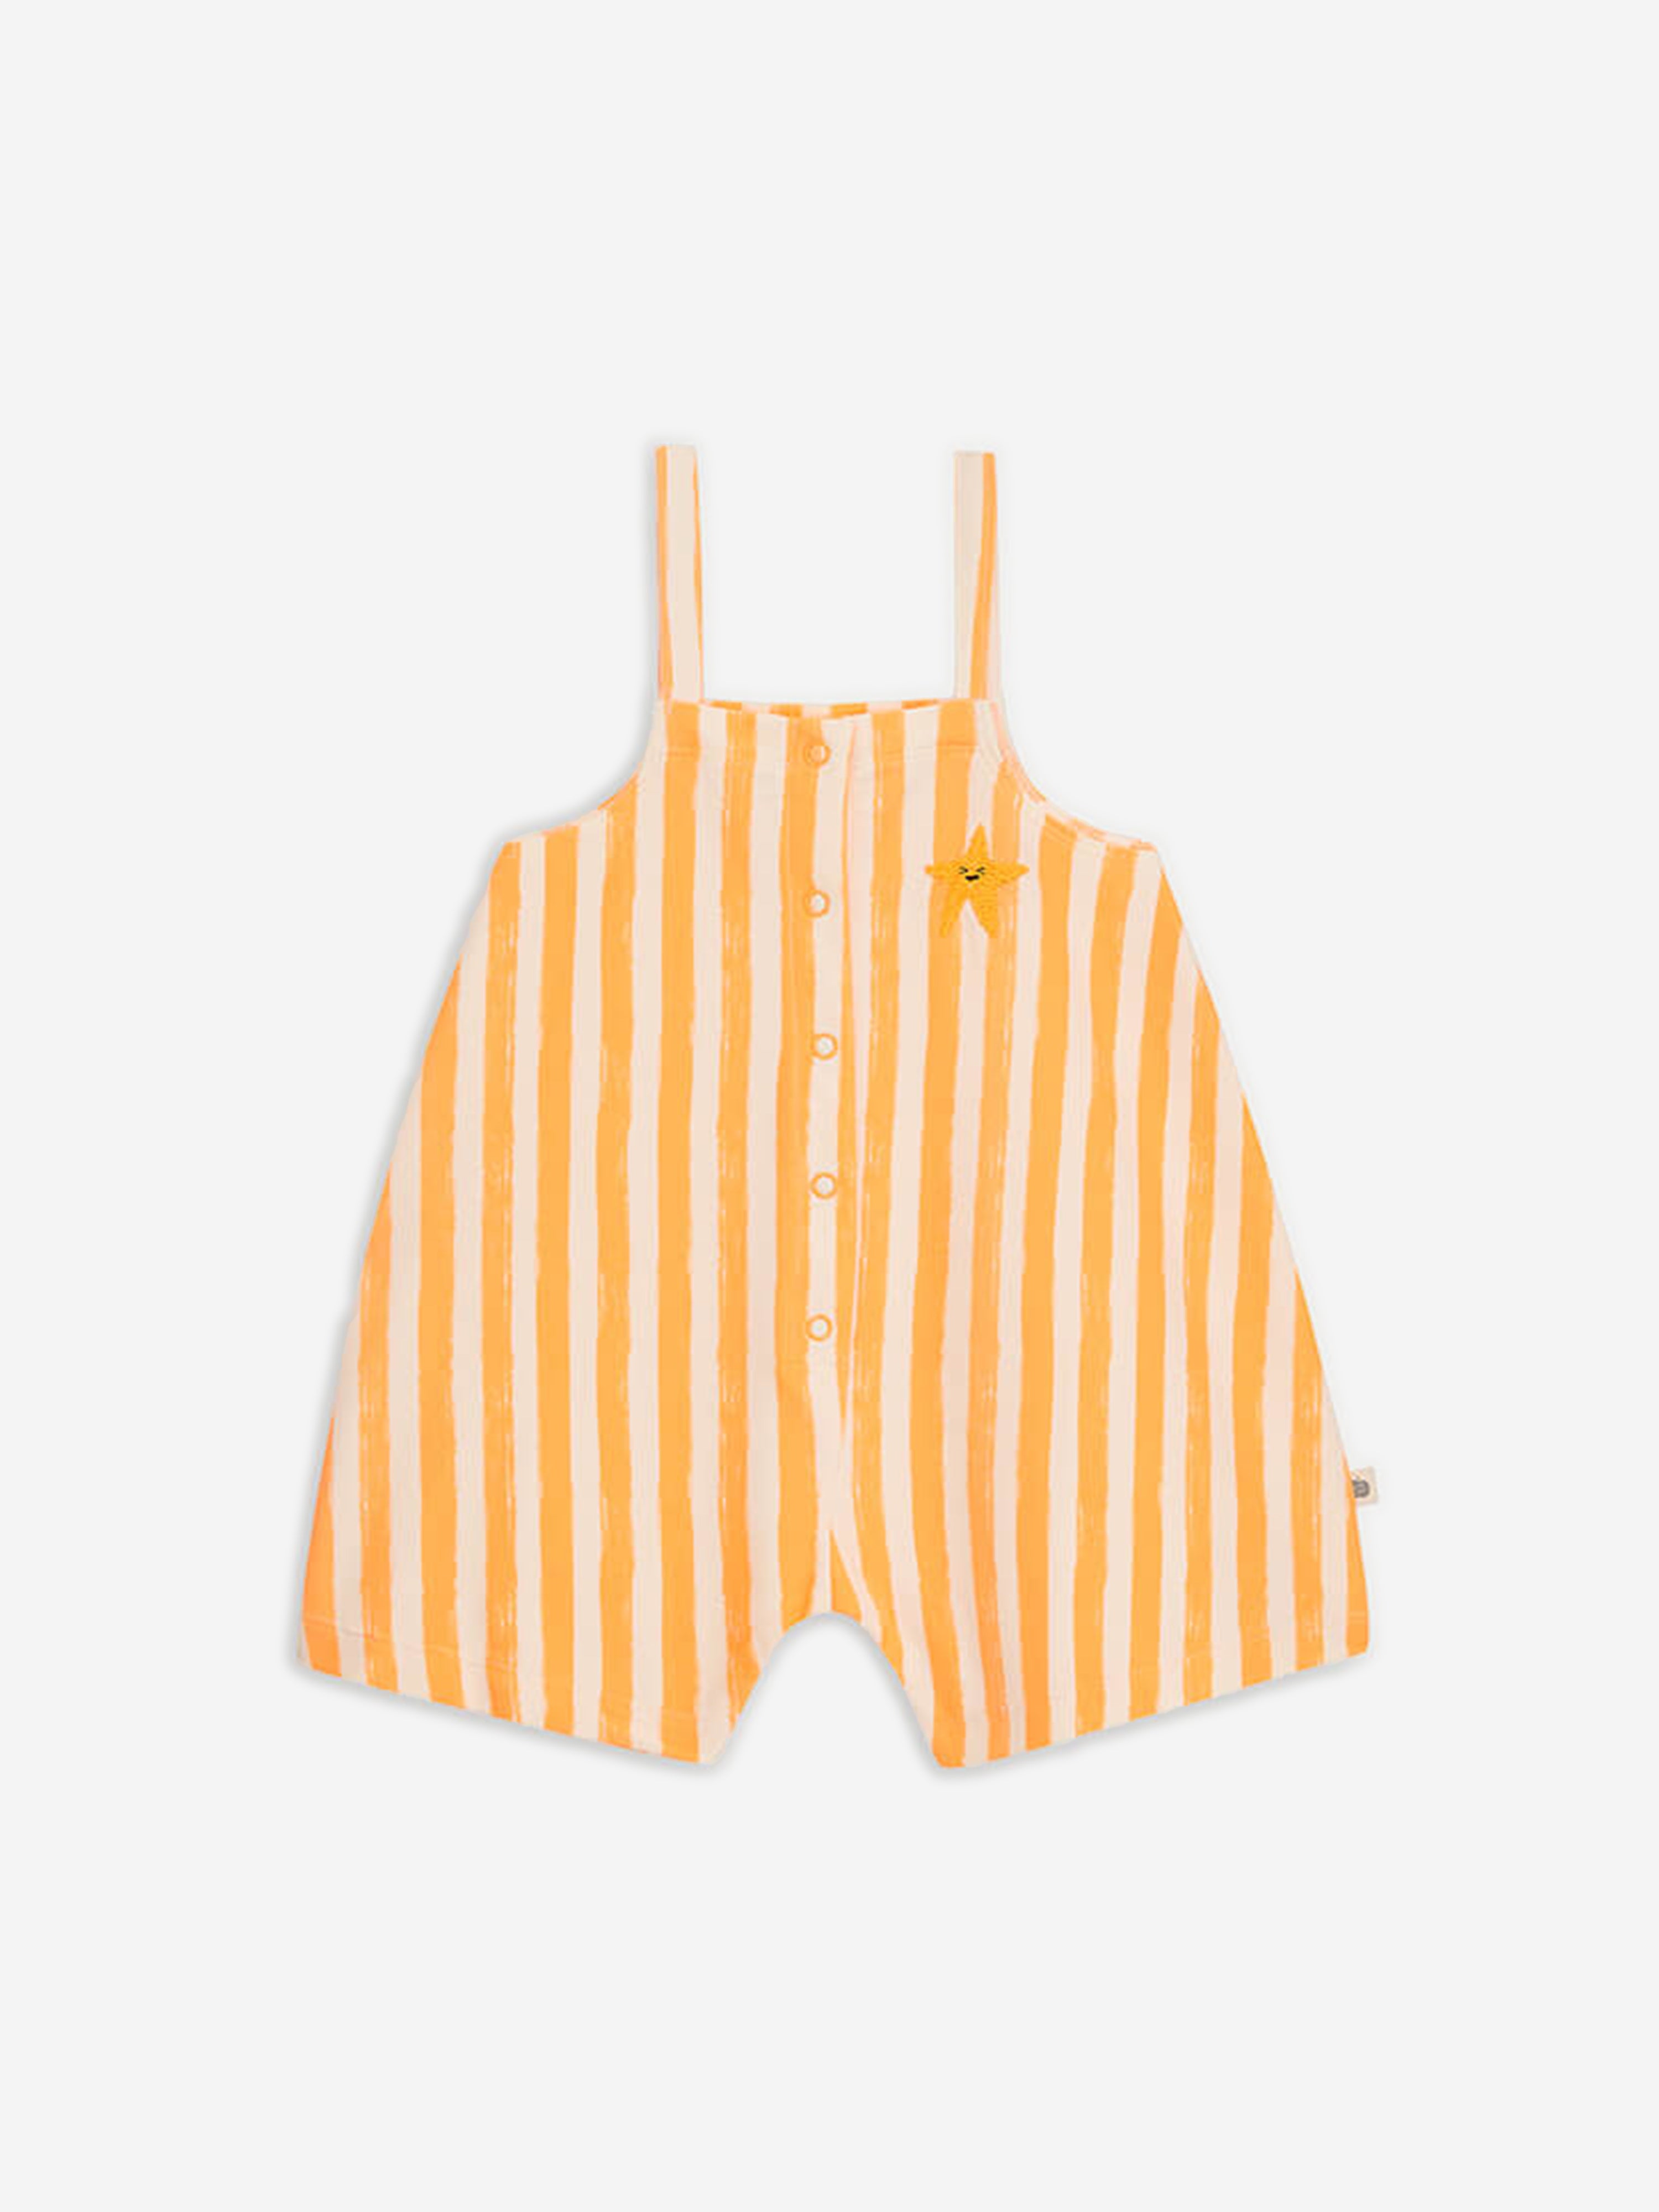 The Bonnie Mob Babies' Kids Cayman Striped Dungaree Romper In Orange